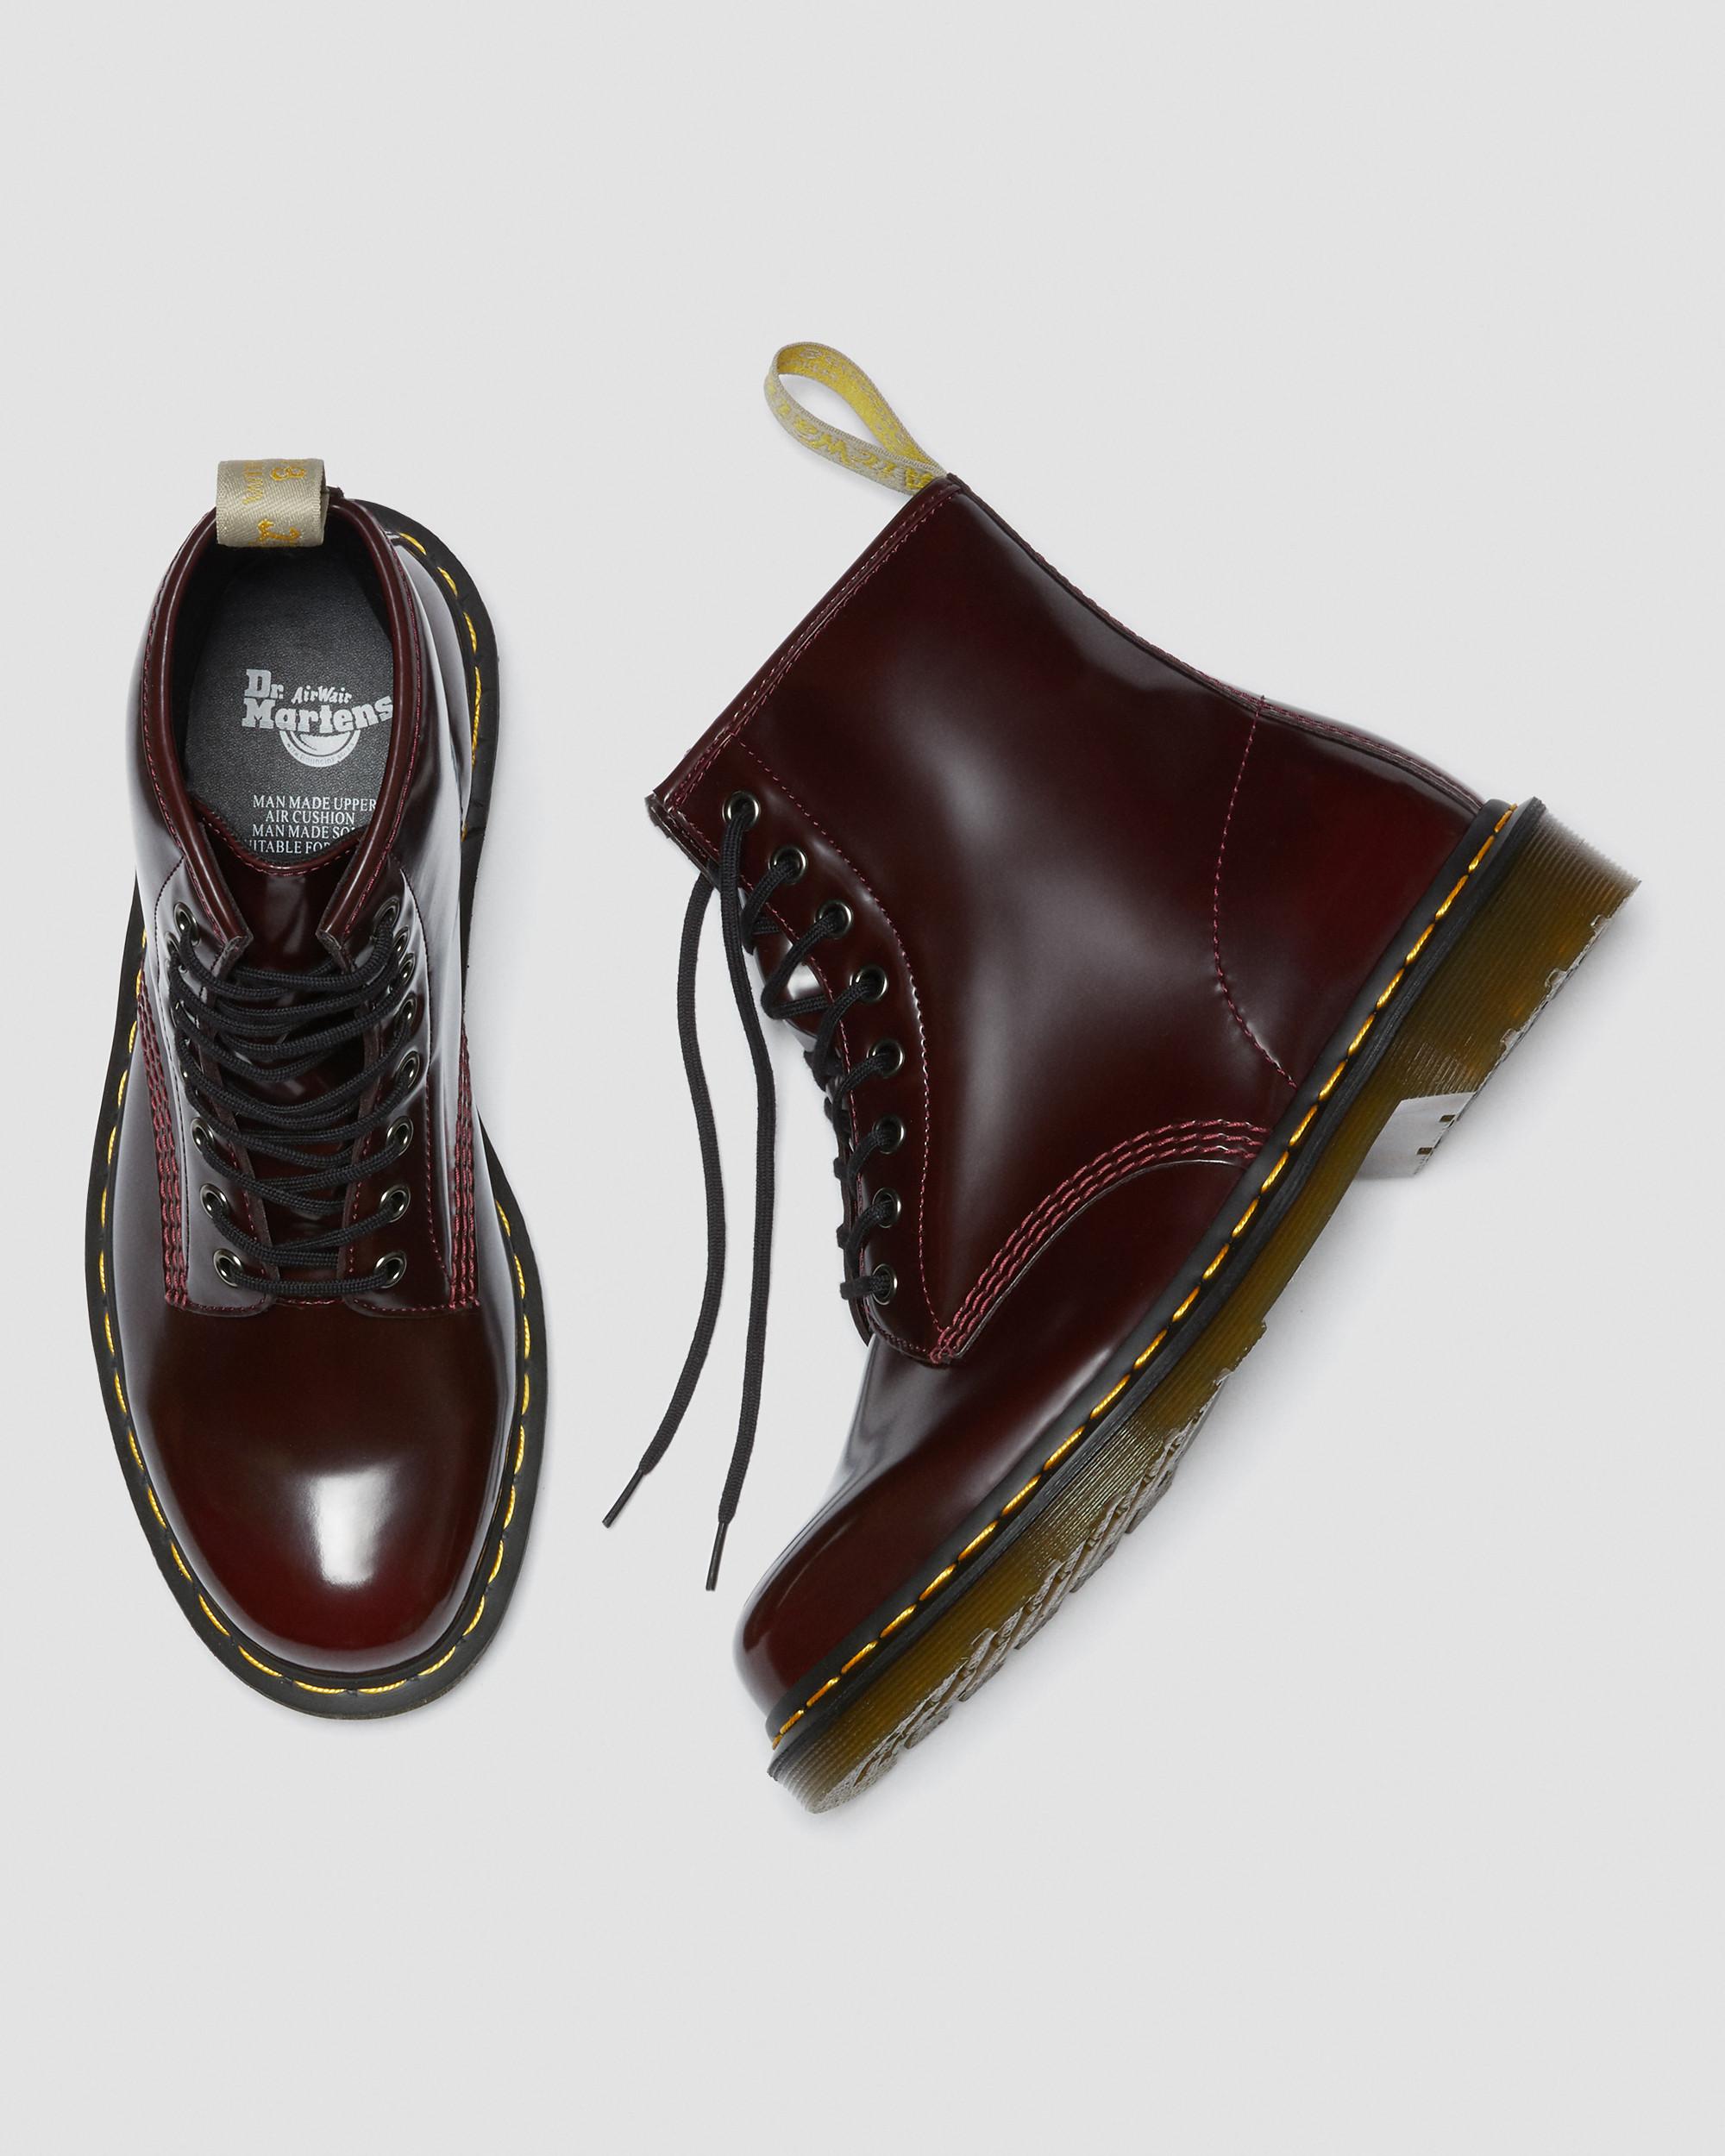 Vegan 1460 Lace Up Boots in Cherry Red | Dr. Martens